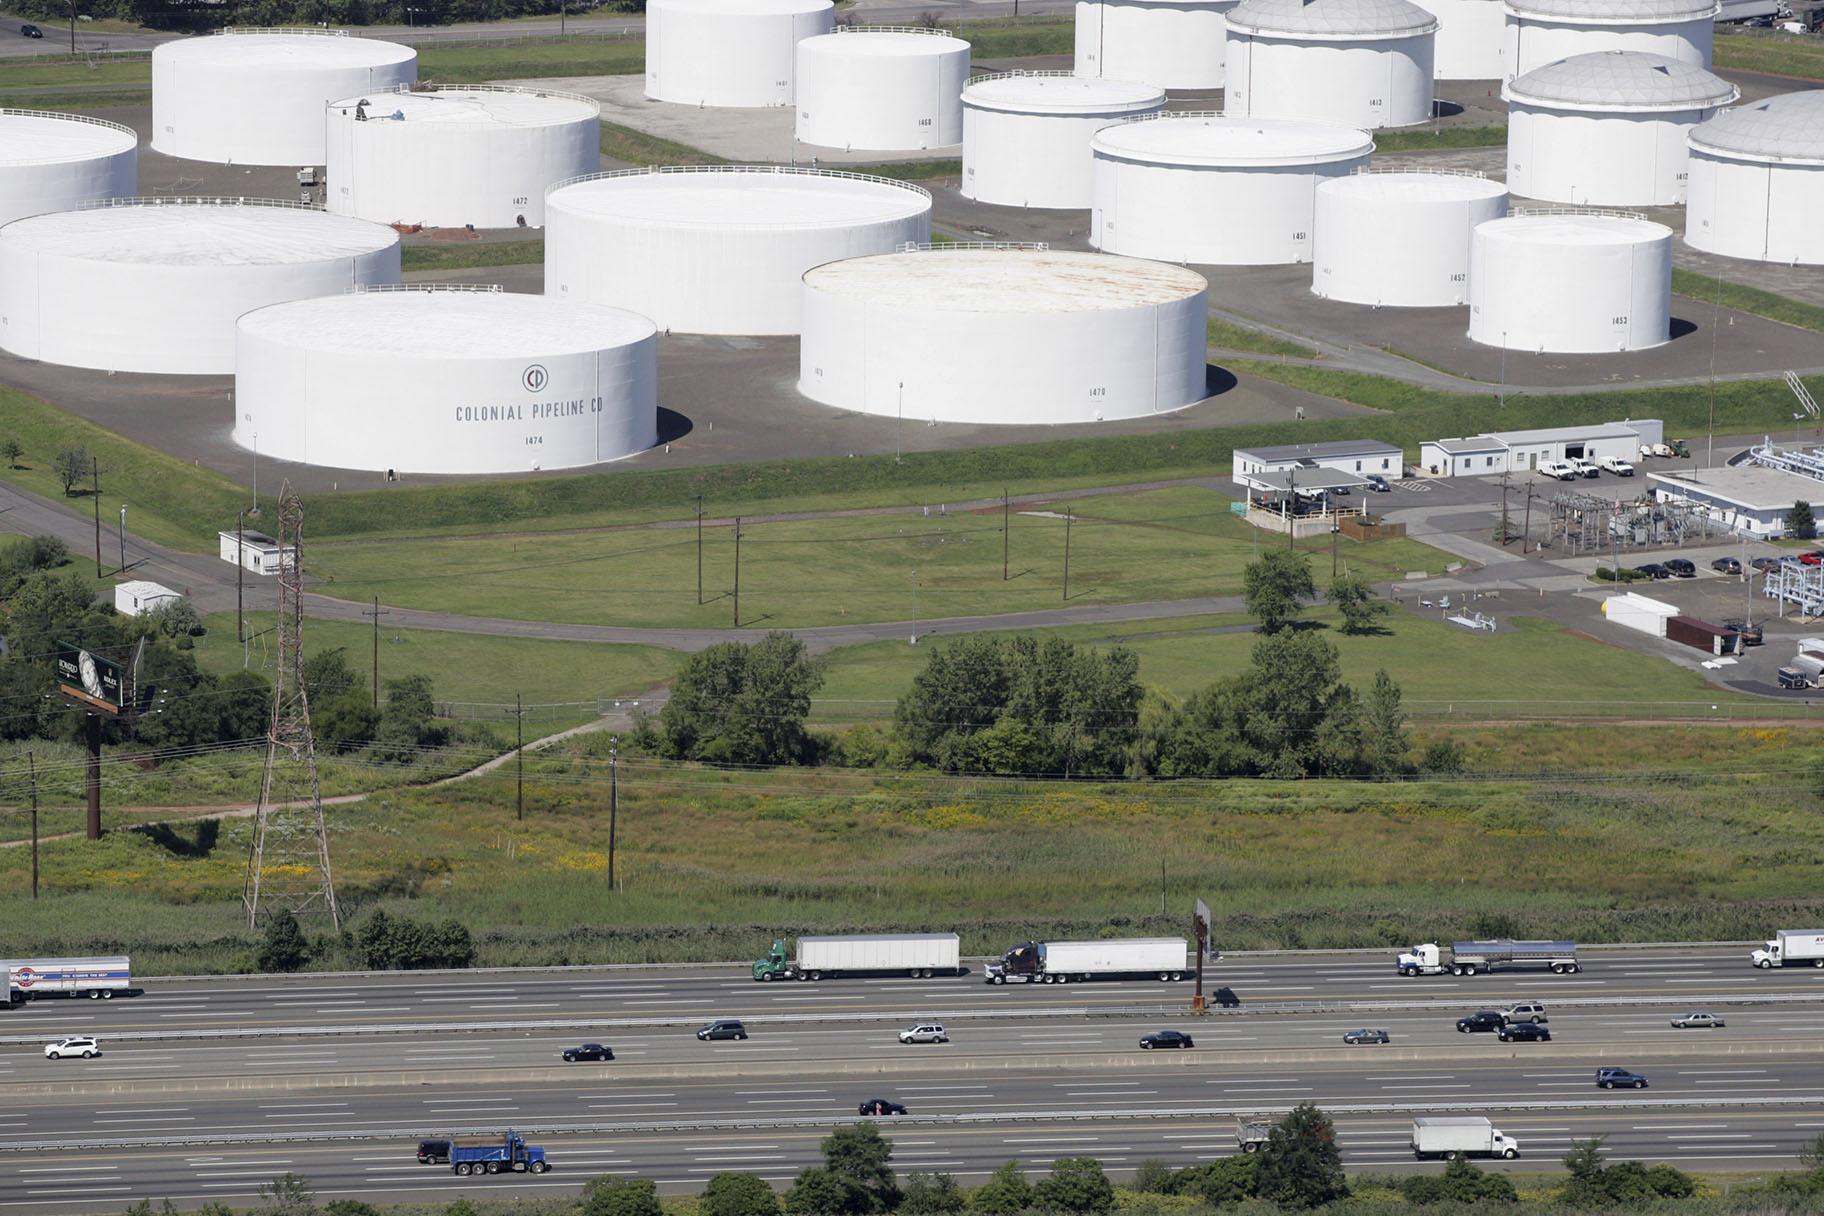 In this Sept. 8, 2008 file photo traffic on I-95 passes oil storage tanks owned by the Colonial Pipeline Company in Linden, N.J. (AP Photo / Mark Lennihan, File)